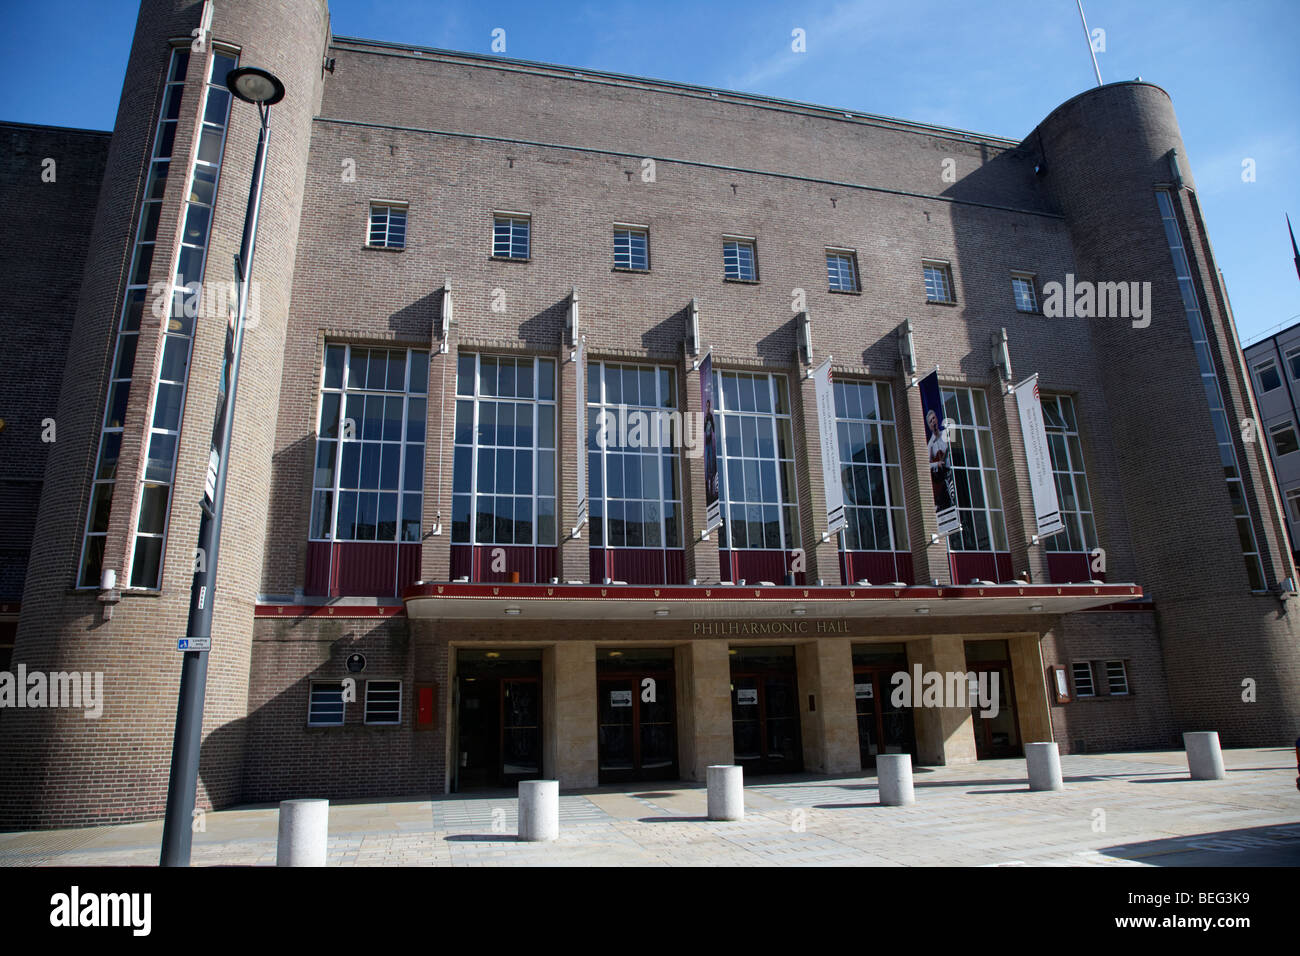 Le Liverpool Philharmonic Hall Liverpool Merseyside England uk Banque D'Images